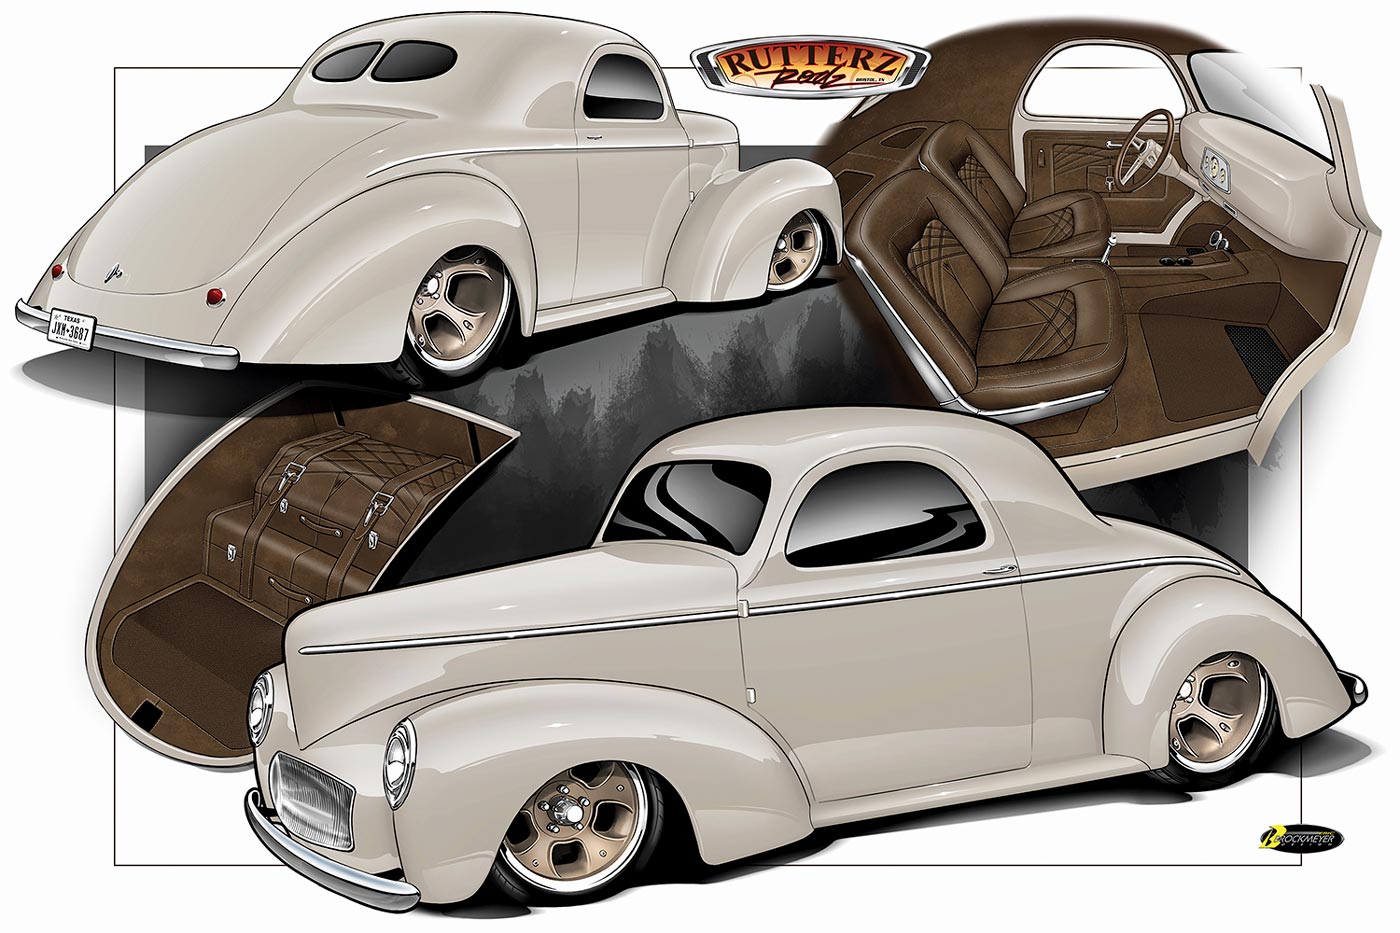 colored digital rendering of the desert beige ’41 Willys Coupe, including interior views of the trunk and cab